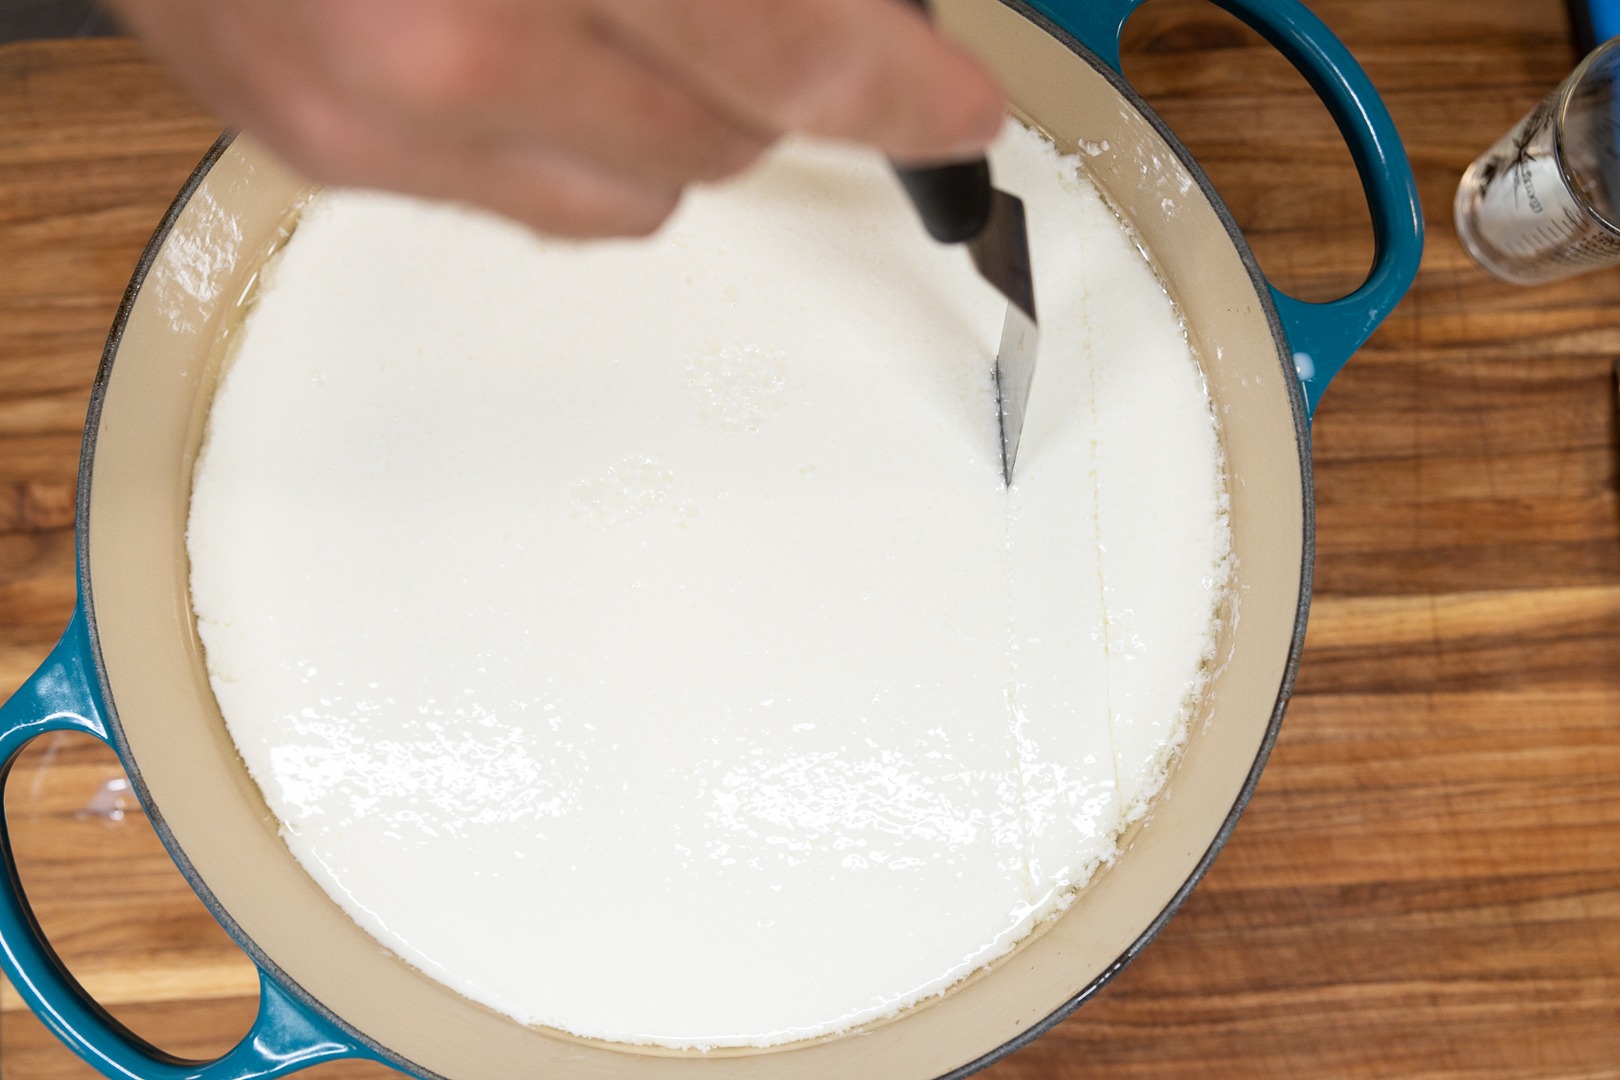 Cutting the gel into curds with an offset spatula